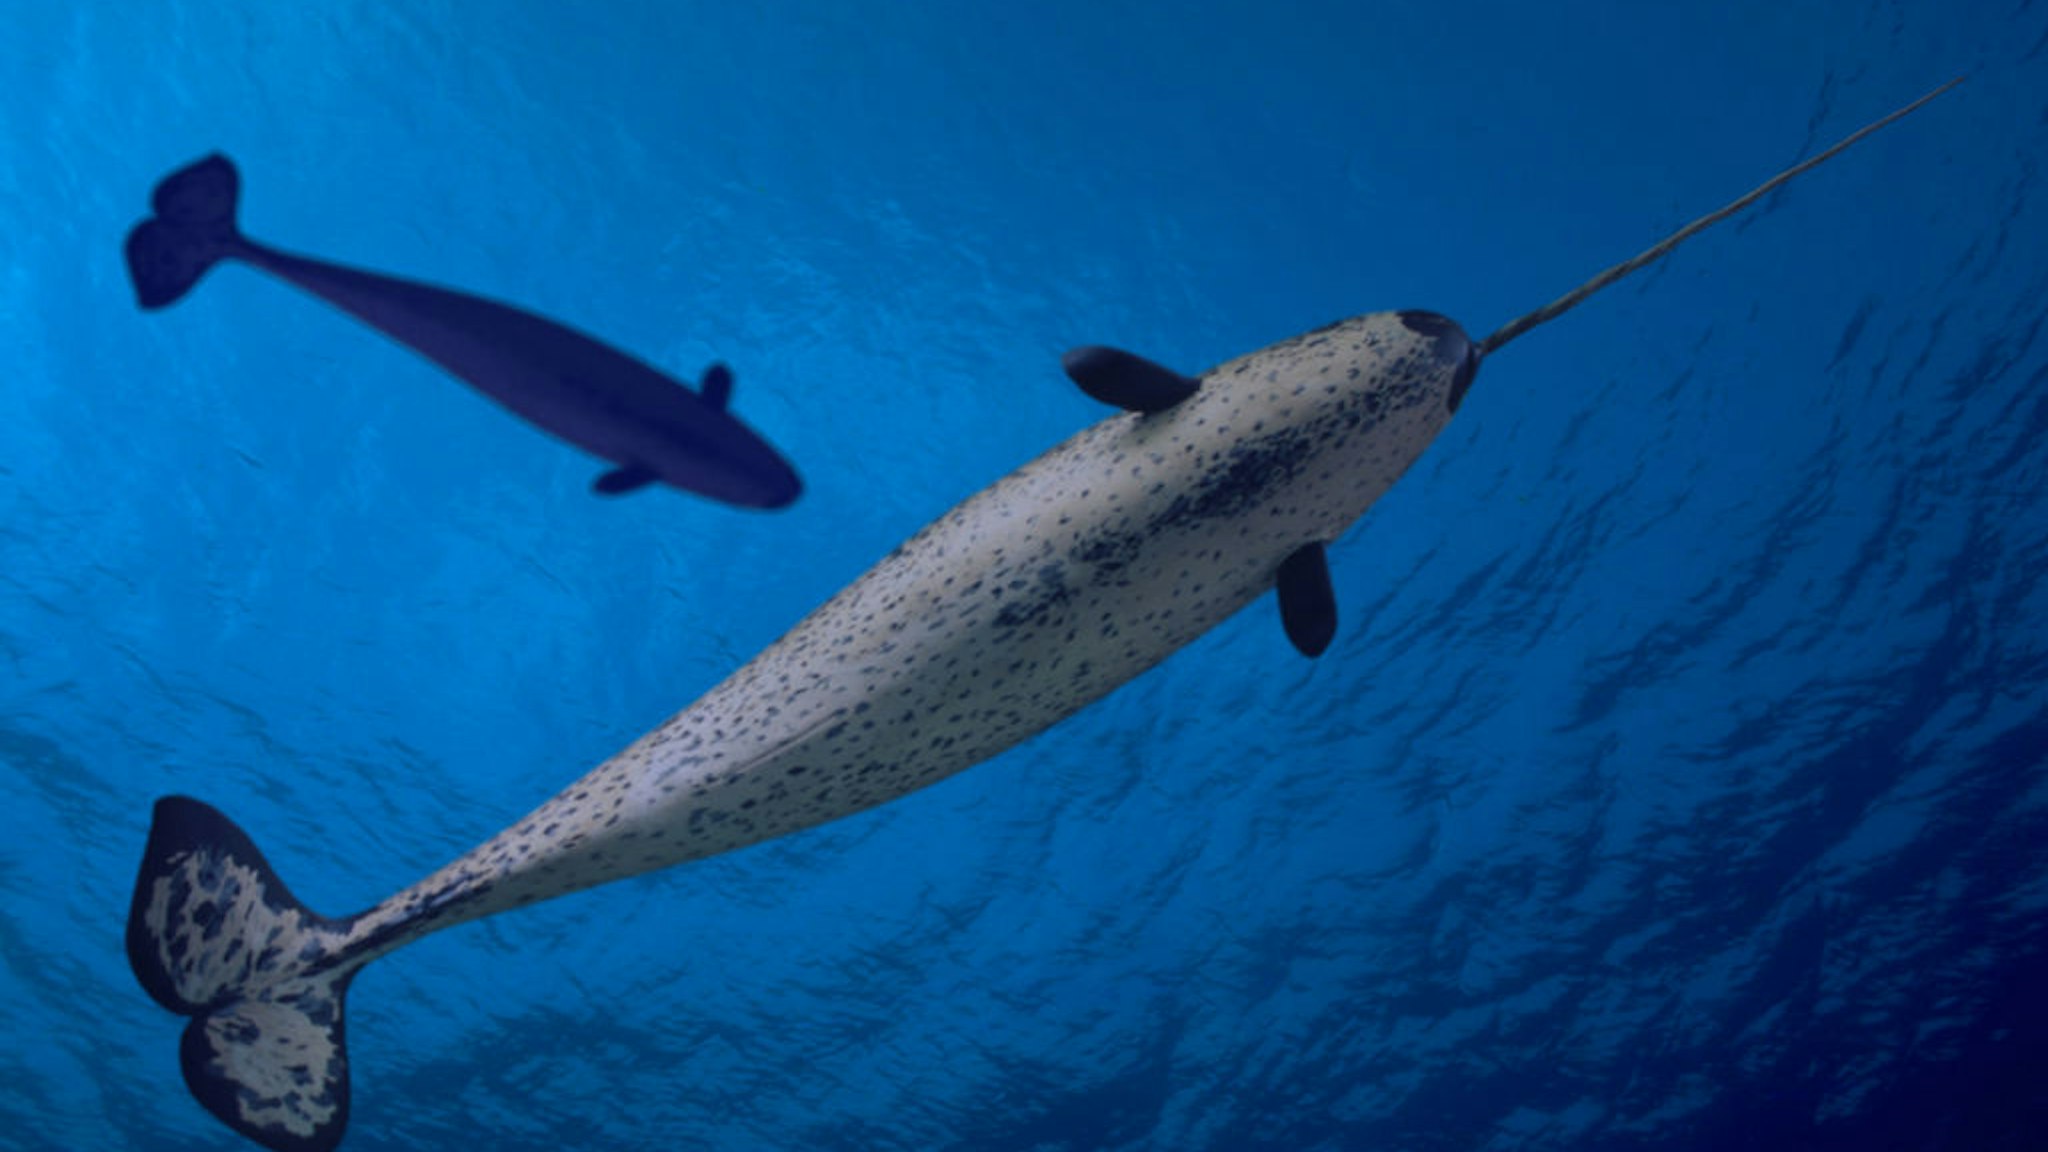 The image of the male and female narwhal Monodon monoceros have been digitally created and then added to this underwater image of the oceans surface.